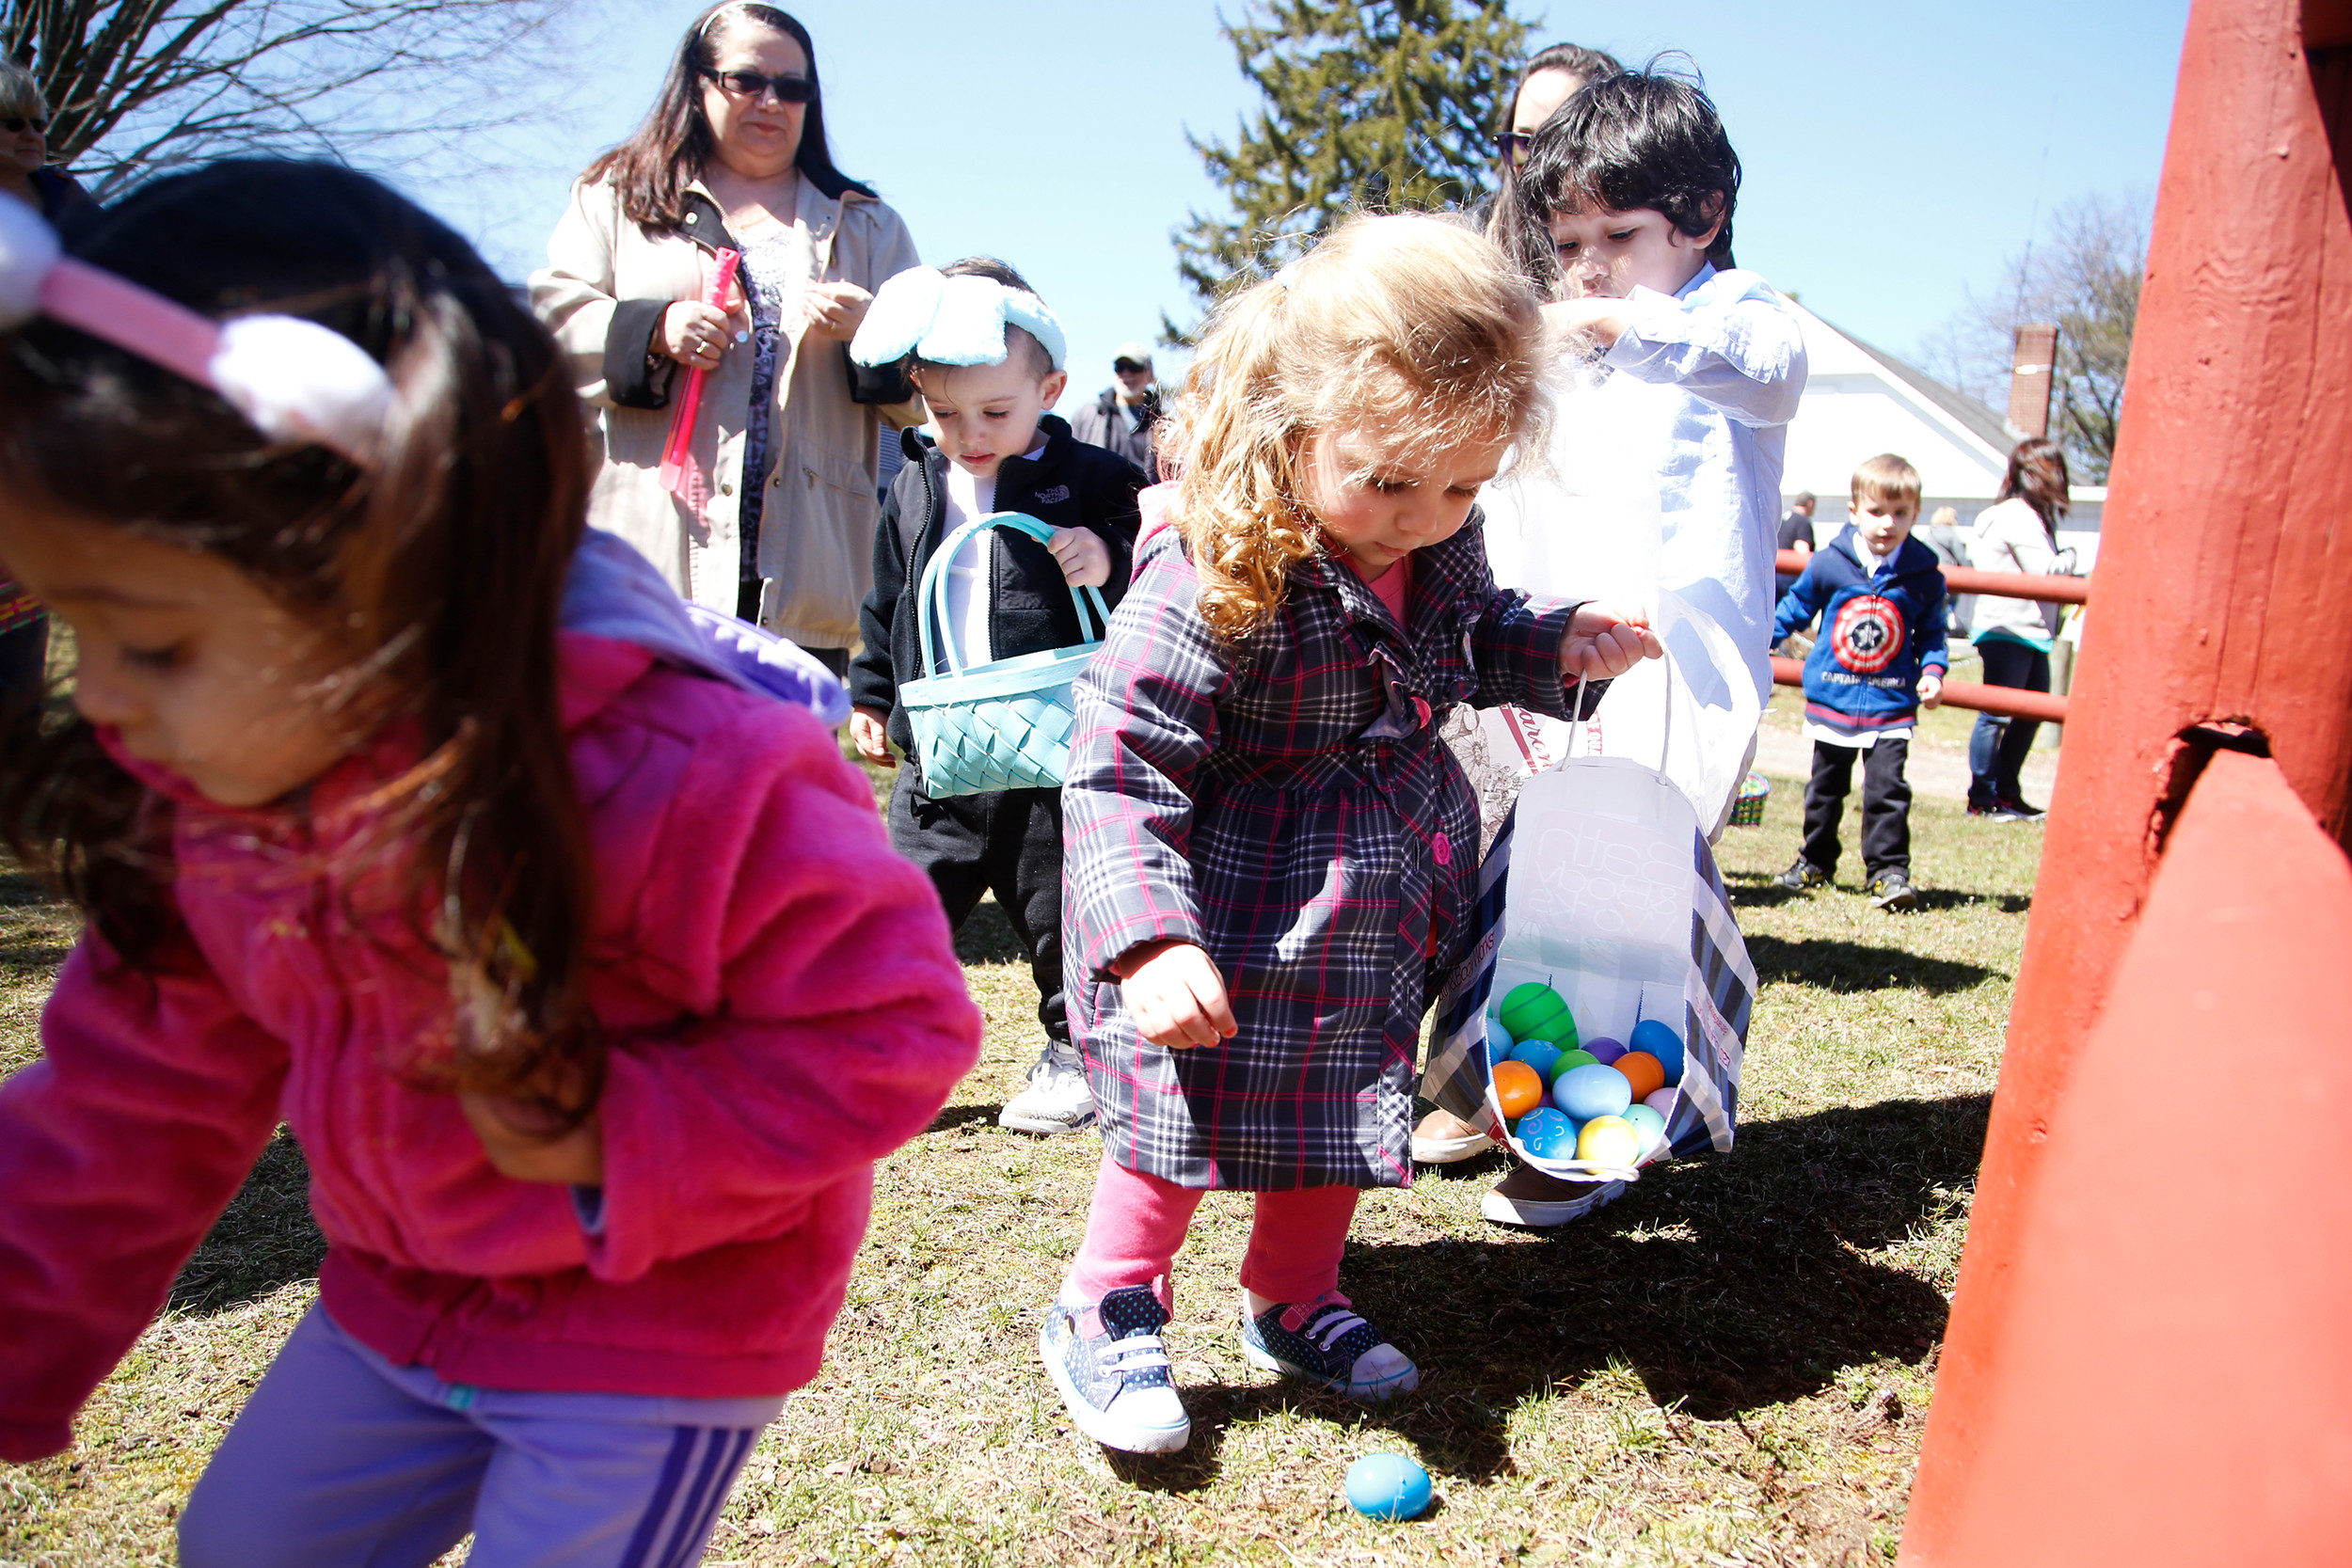 Morgan Zizzo, 2, found a blue egg for her basket.